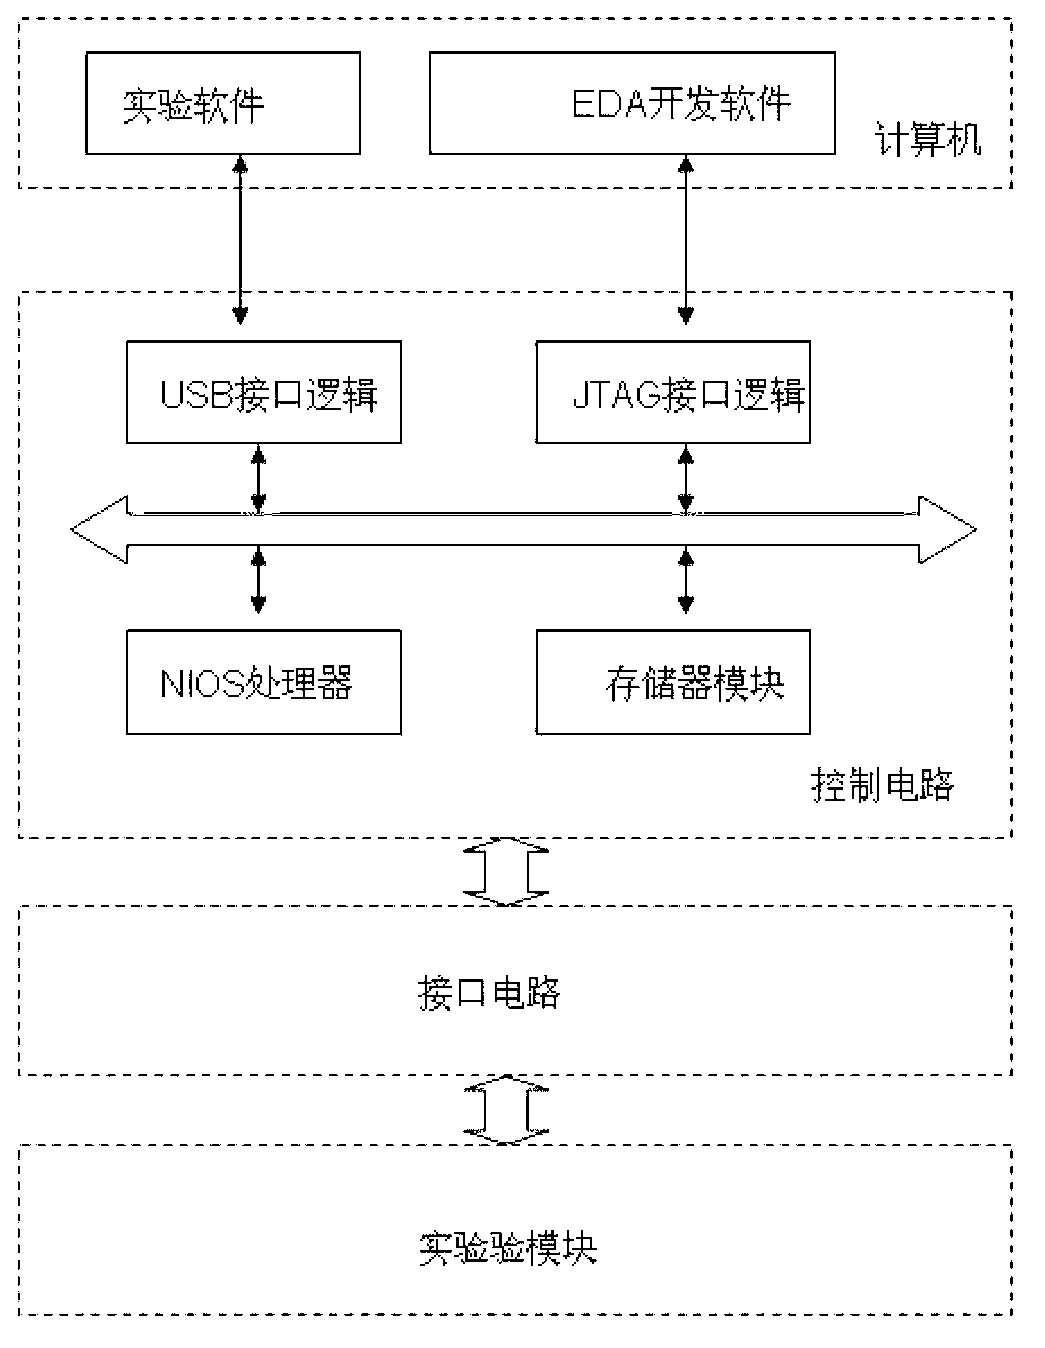 Method and device for sharing experimental equipment by computer hardware courses